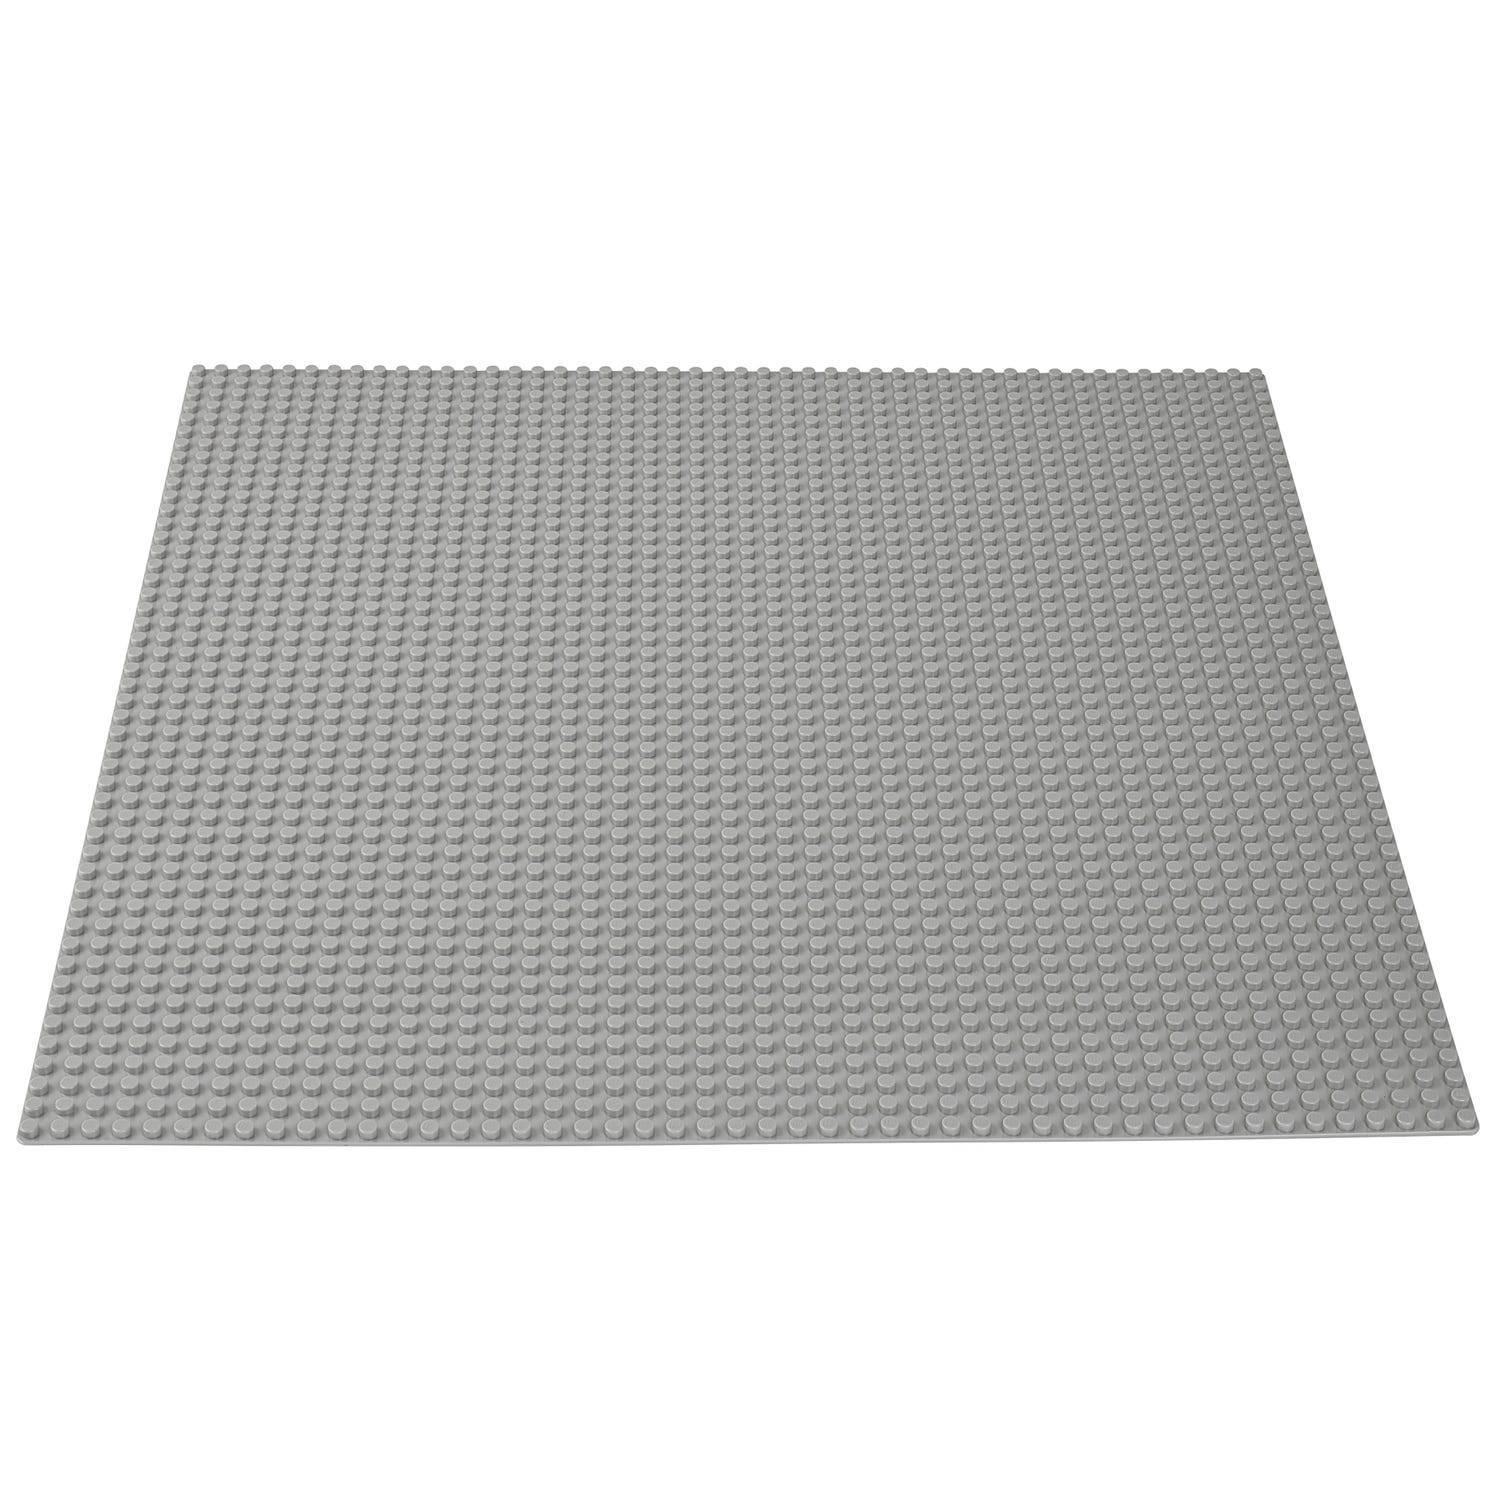 Official LEGO Base Plate Large 15”x15” Gray 48x48 studs